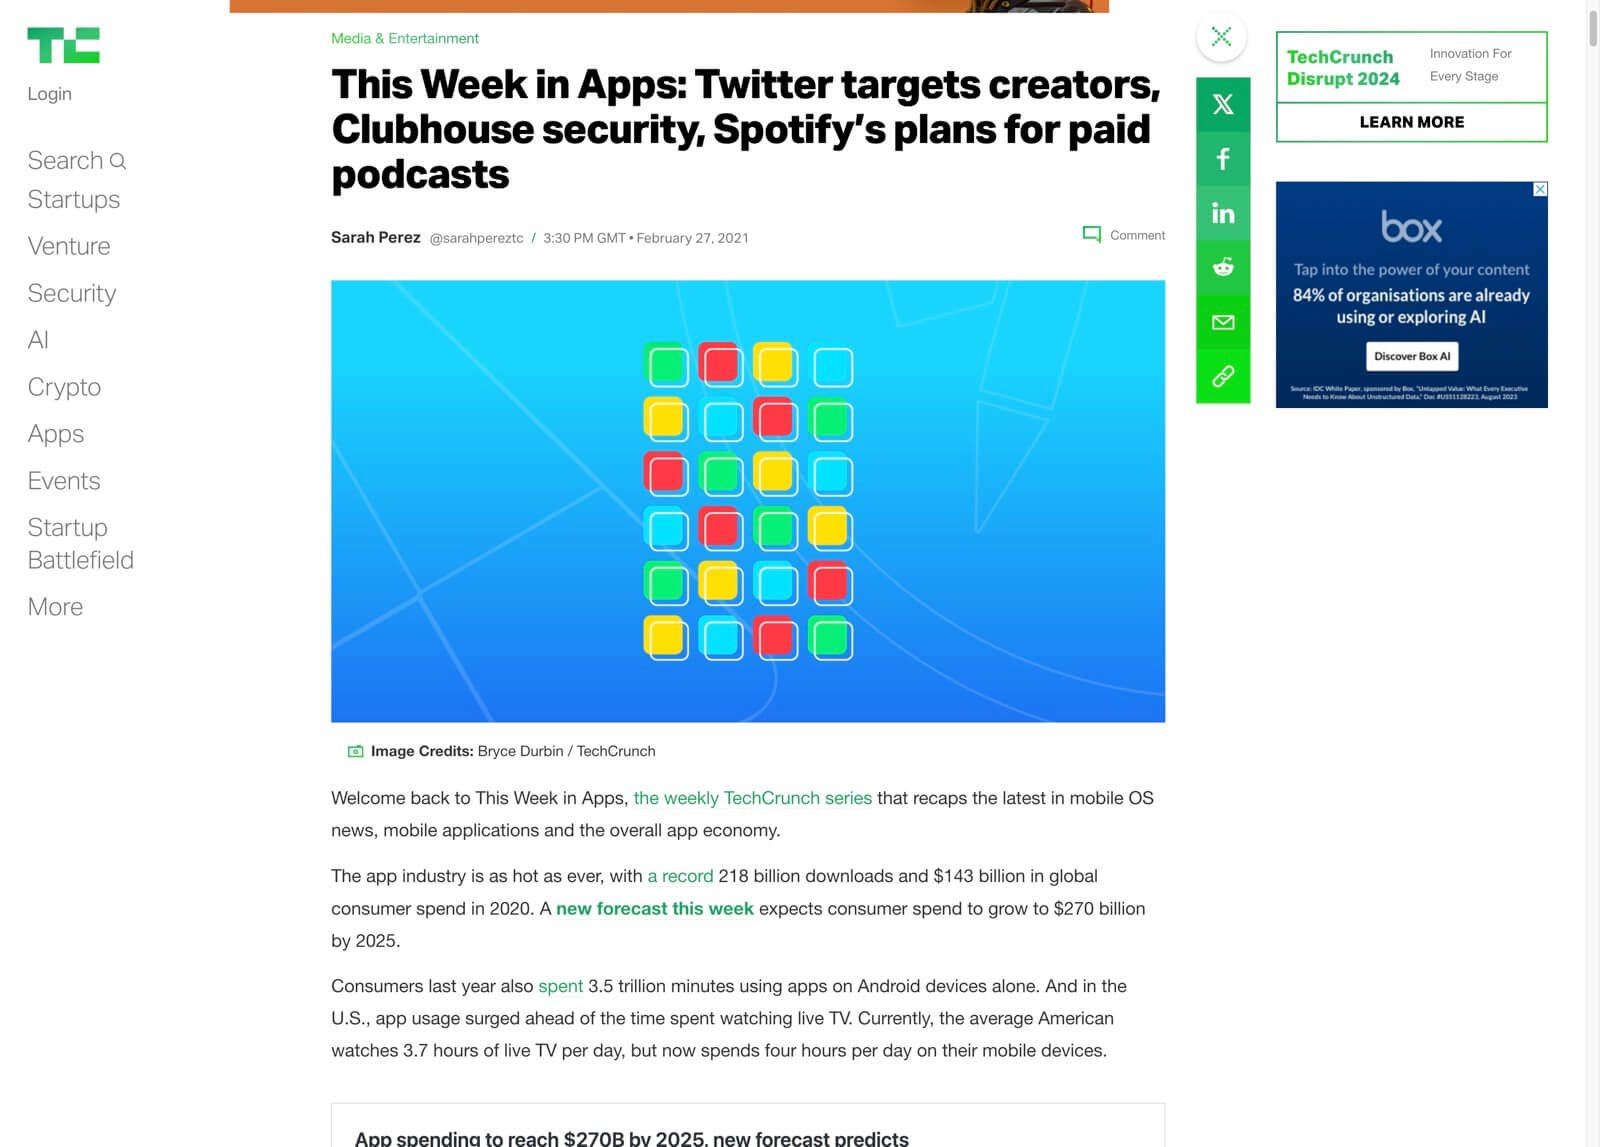 Techcrunch-This-Week-in-Apps-Twitter-targets-creators-Clubhouse-security-Spotify’s-plans-for-paid-podcasts-TechCrunch.jpg